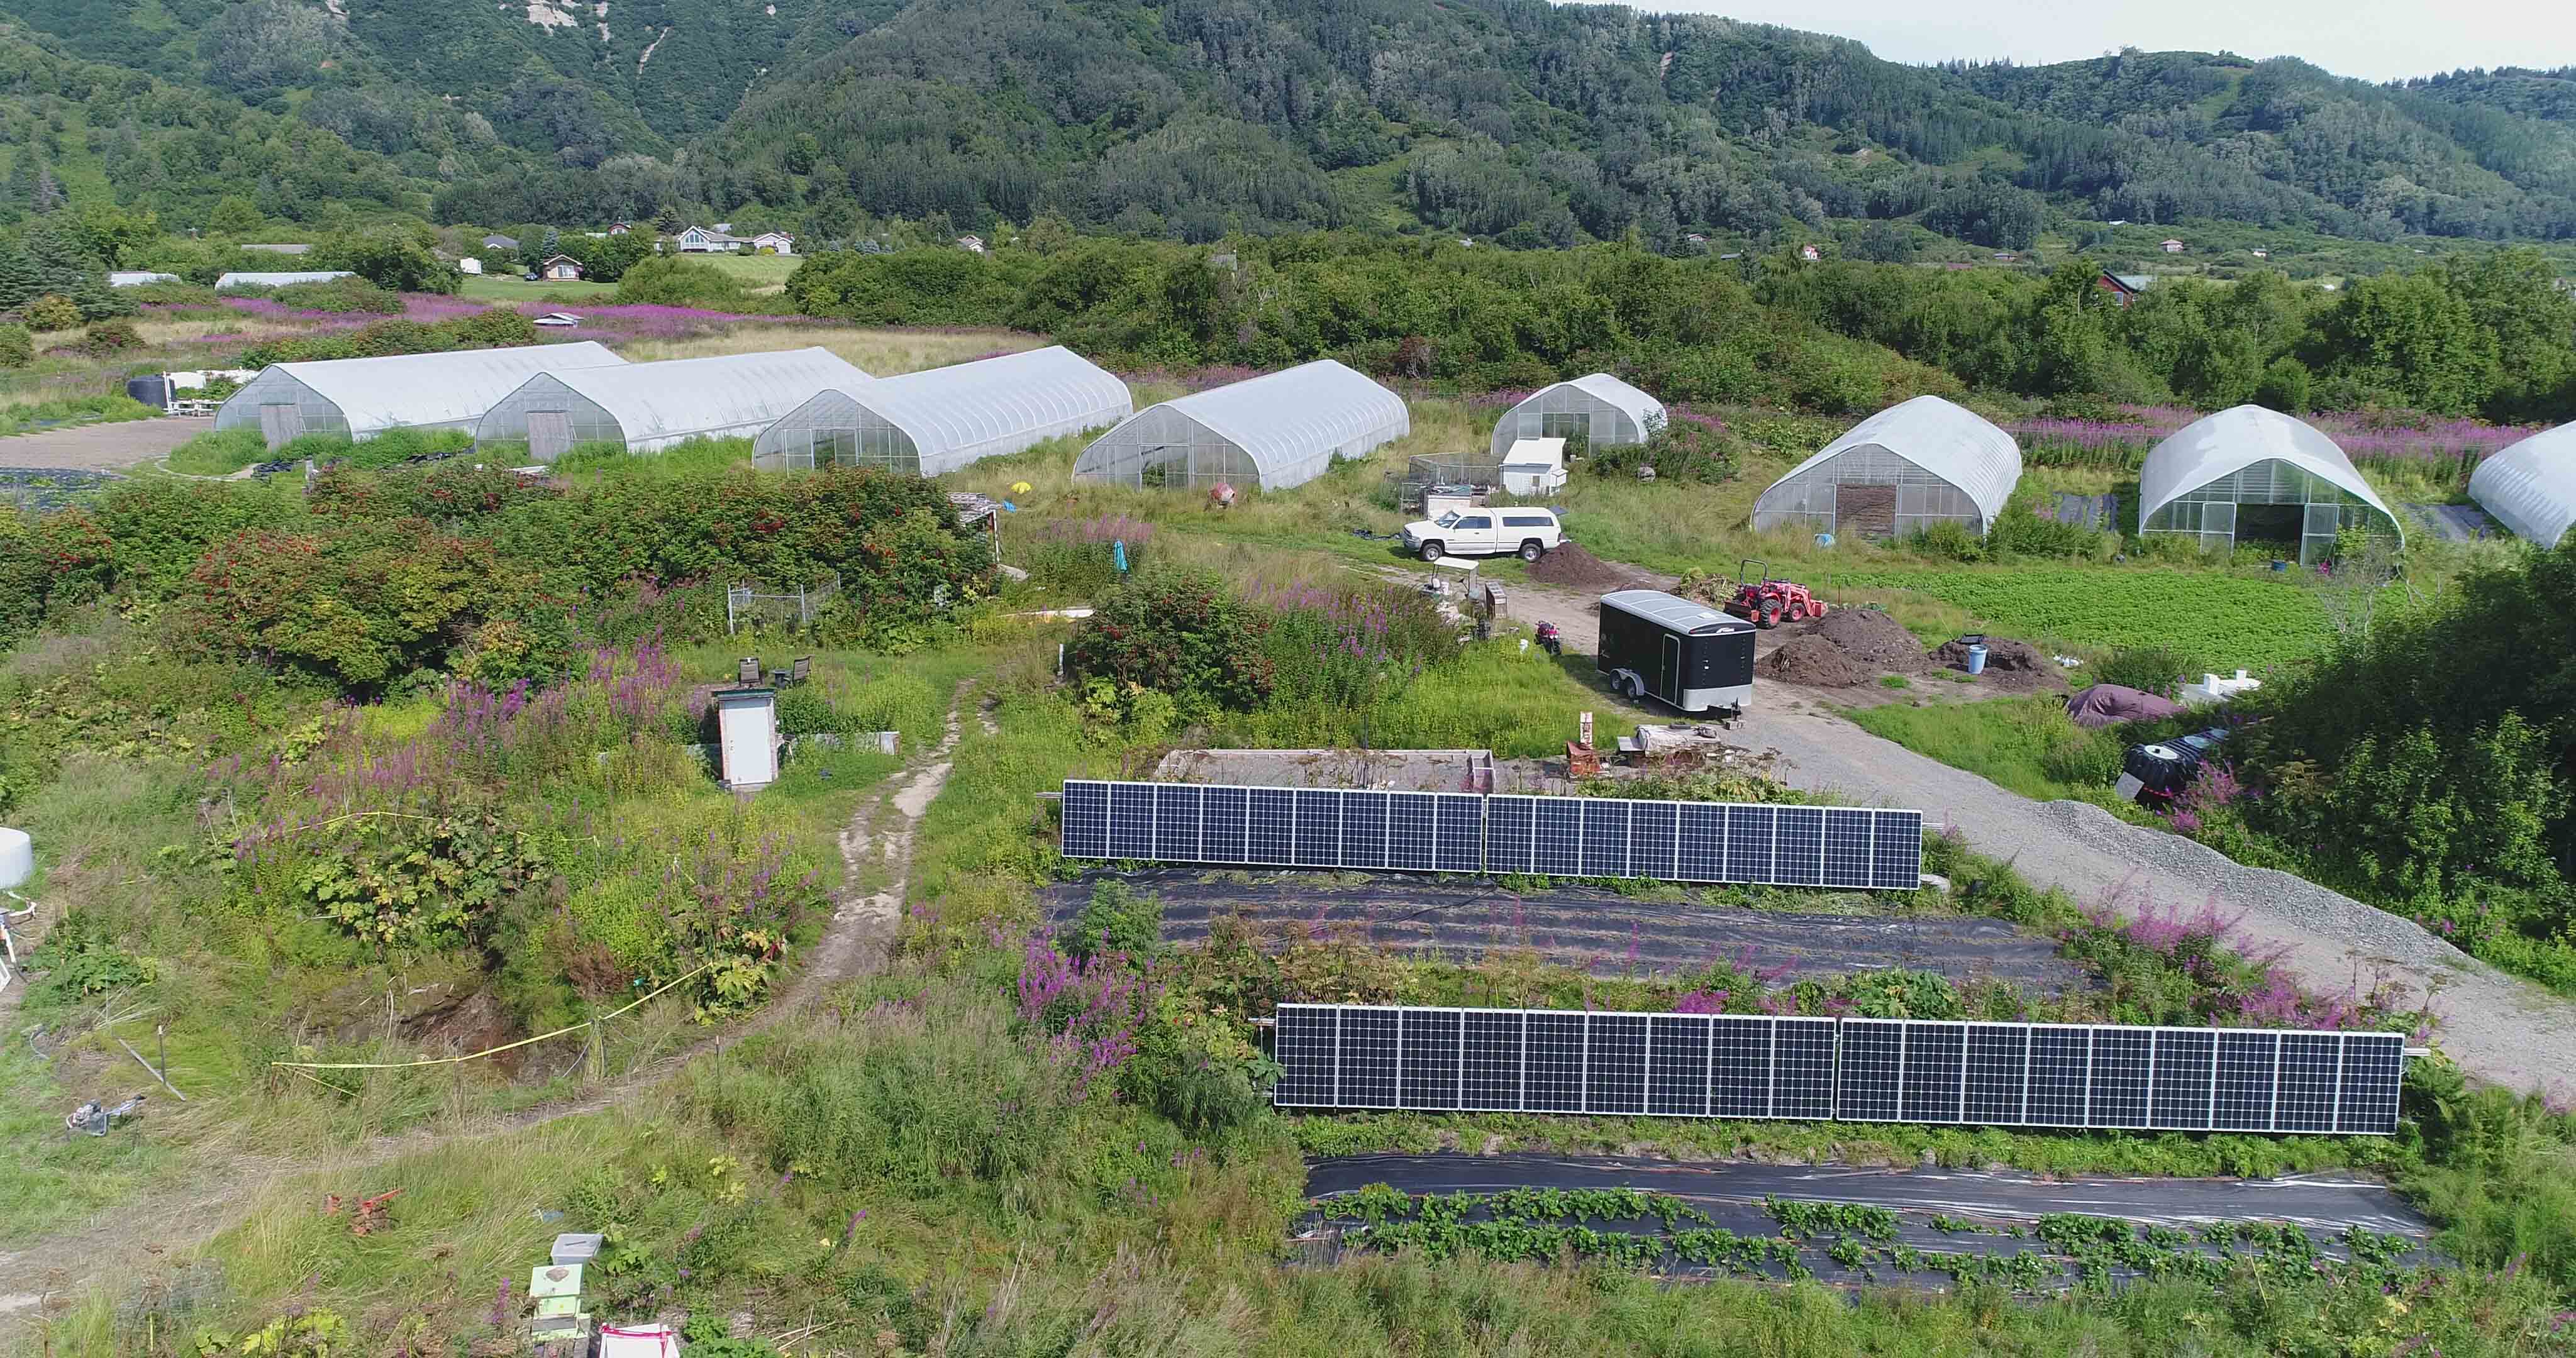 Agrivoltaics Could Help Remote Communities Increase Solar Energy and Food Production